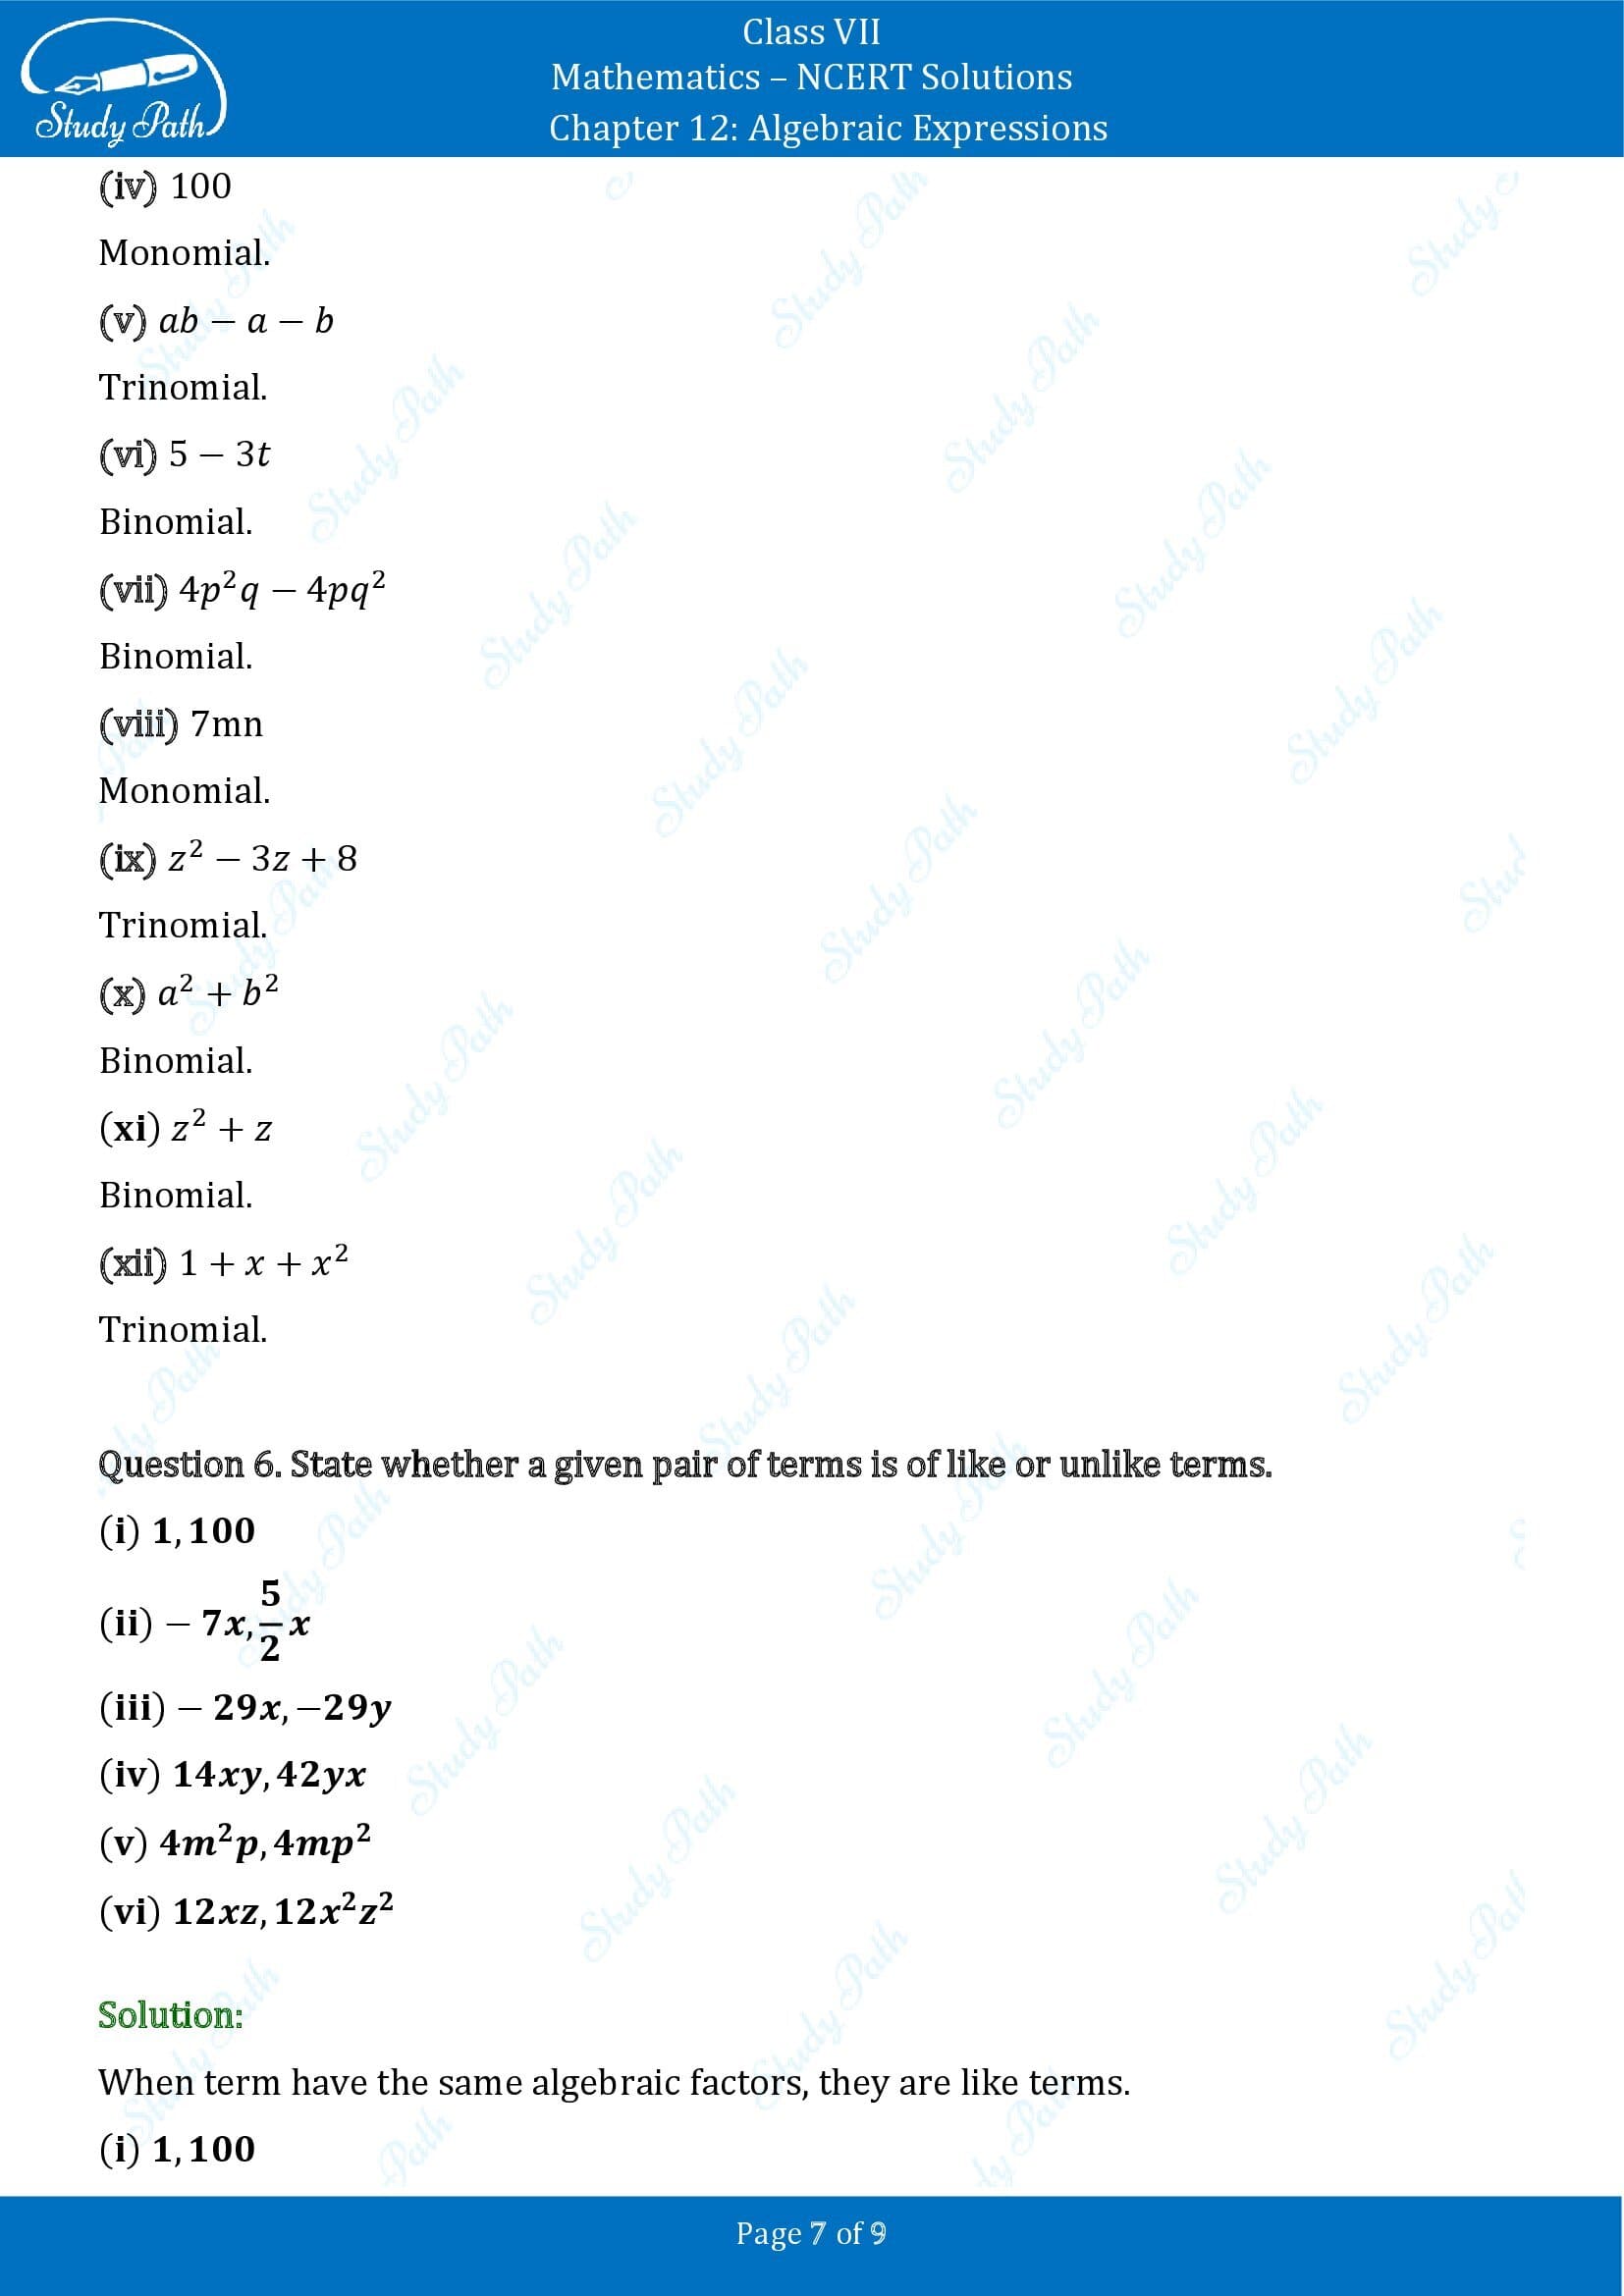 NCERT Solutions for Class 7 Maths Chapter 12 Algebraic Expressions Exercise 12.1 00007